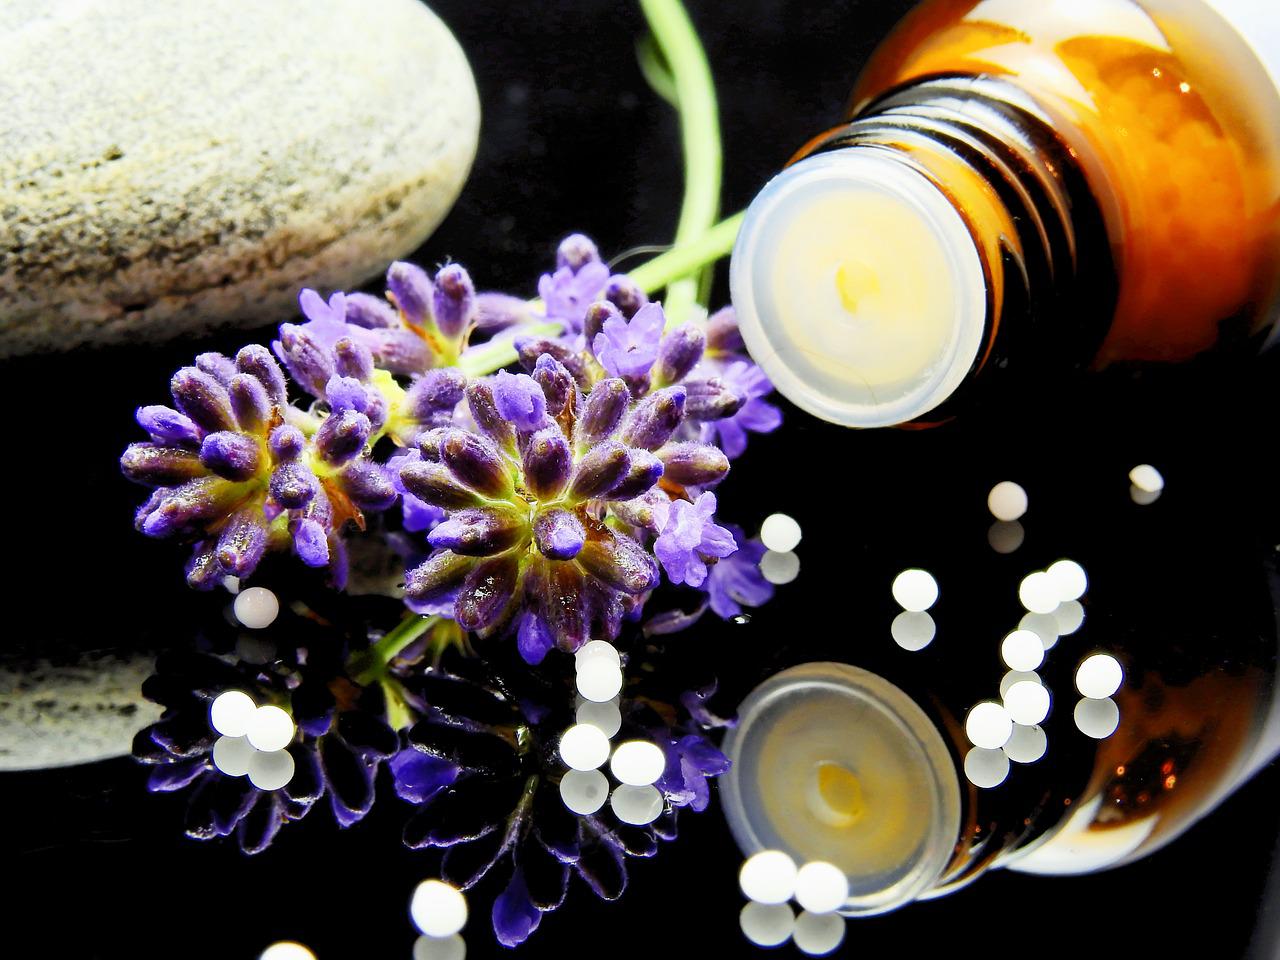 5 BENEFITS OF HOMEOPATHY